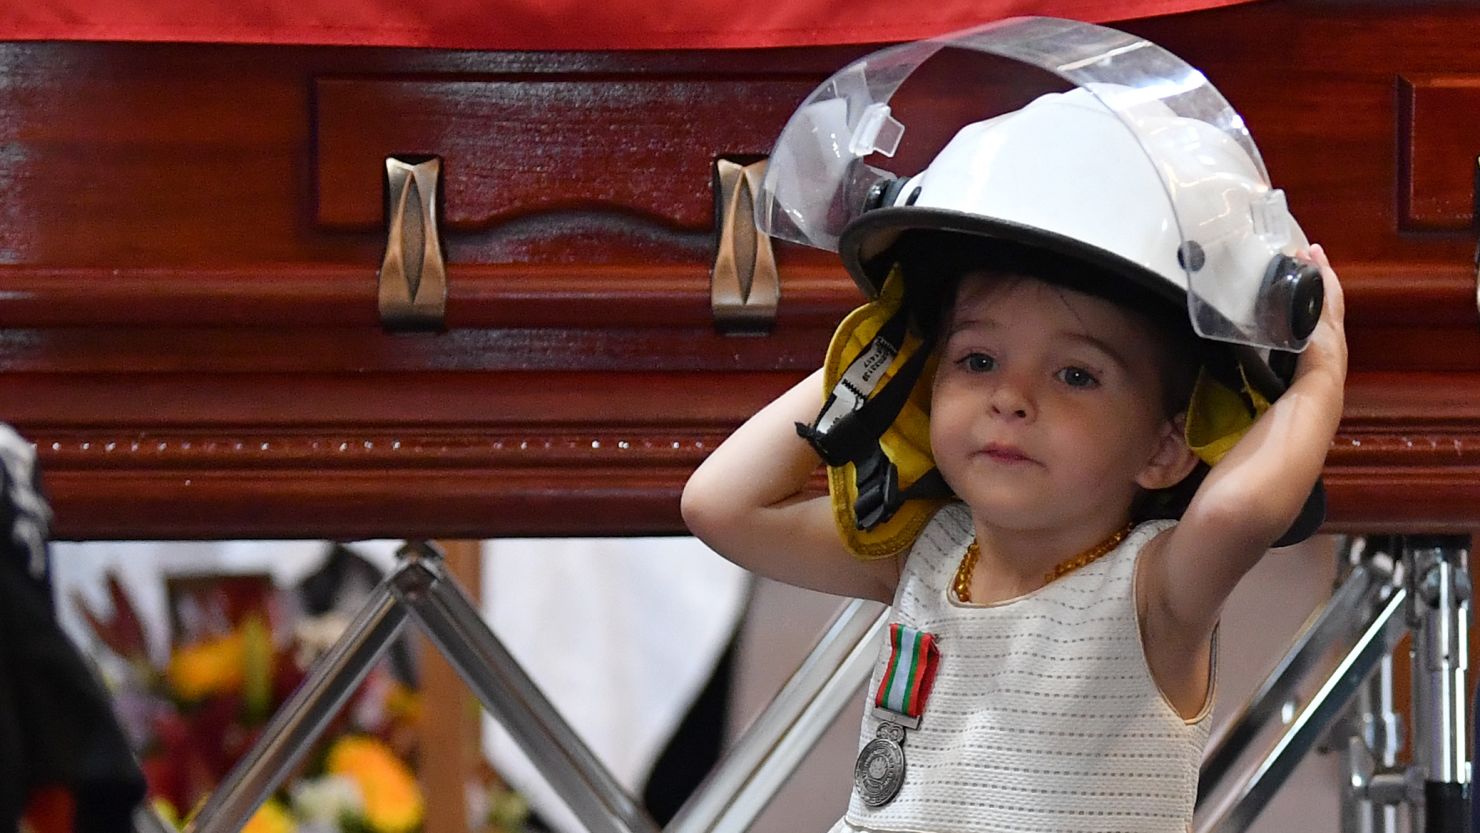 Charlotte O'Dwyer, the young daughter of Rural Fire Service volunteer Andrew O'Dwyer, stands in front of her father's casket wearing his helmet.